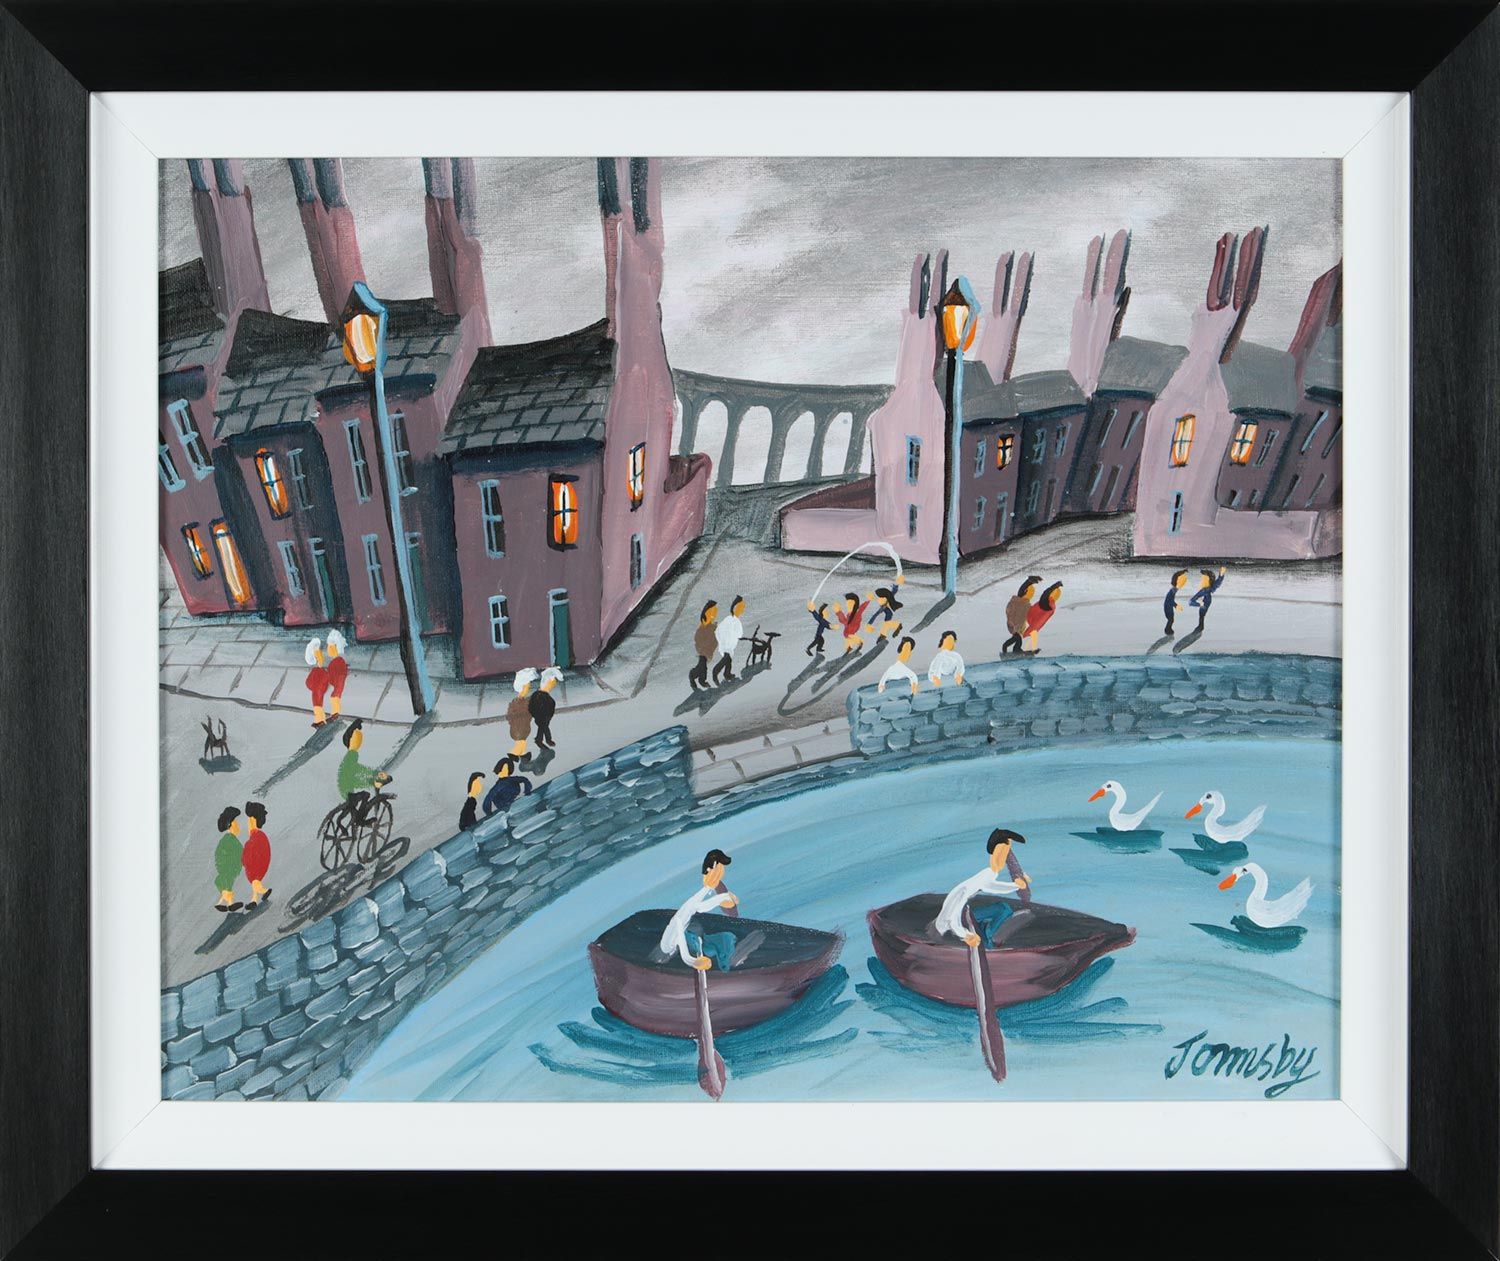 ROWING BOATS by John Ormsby